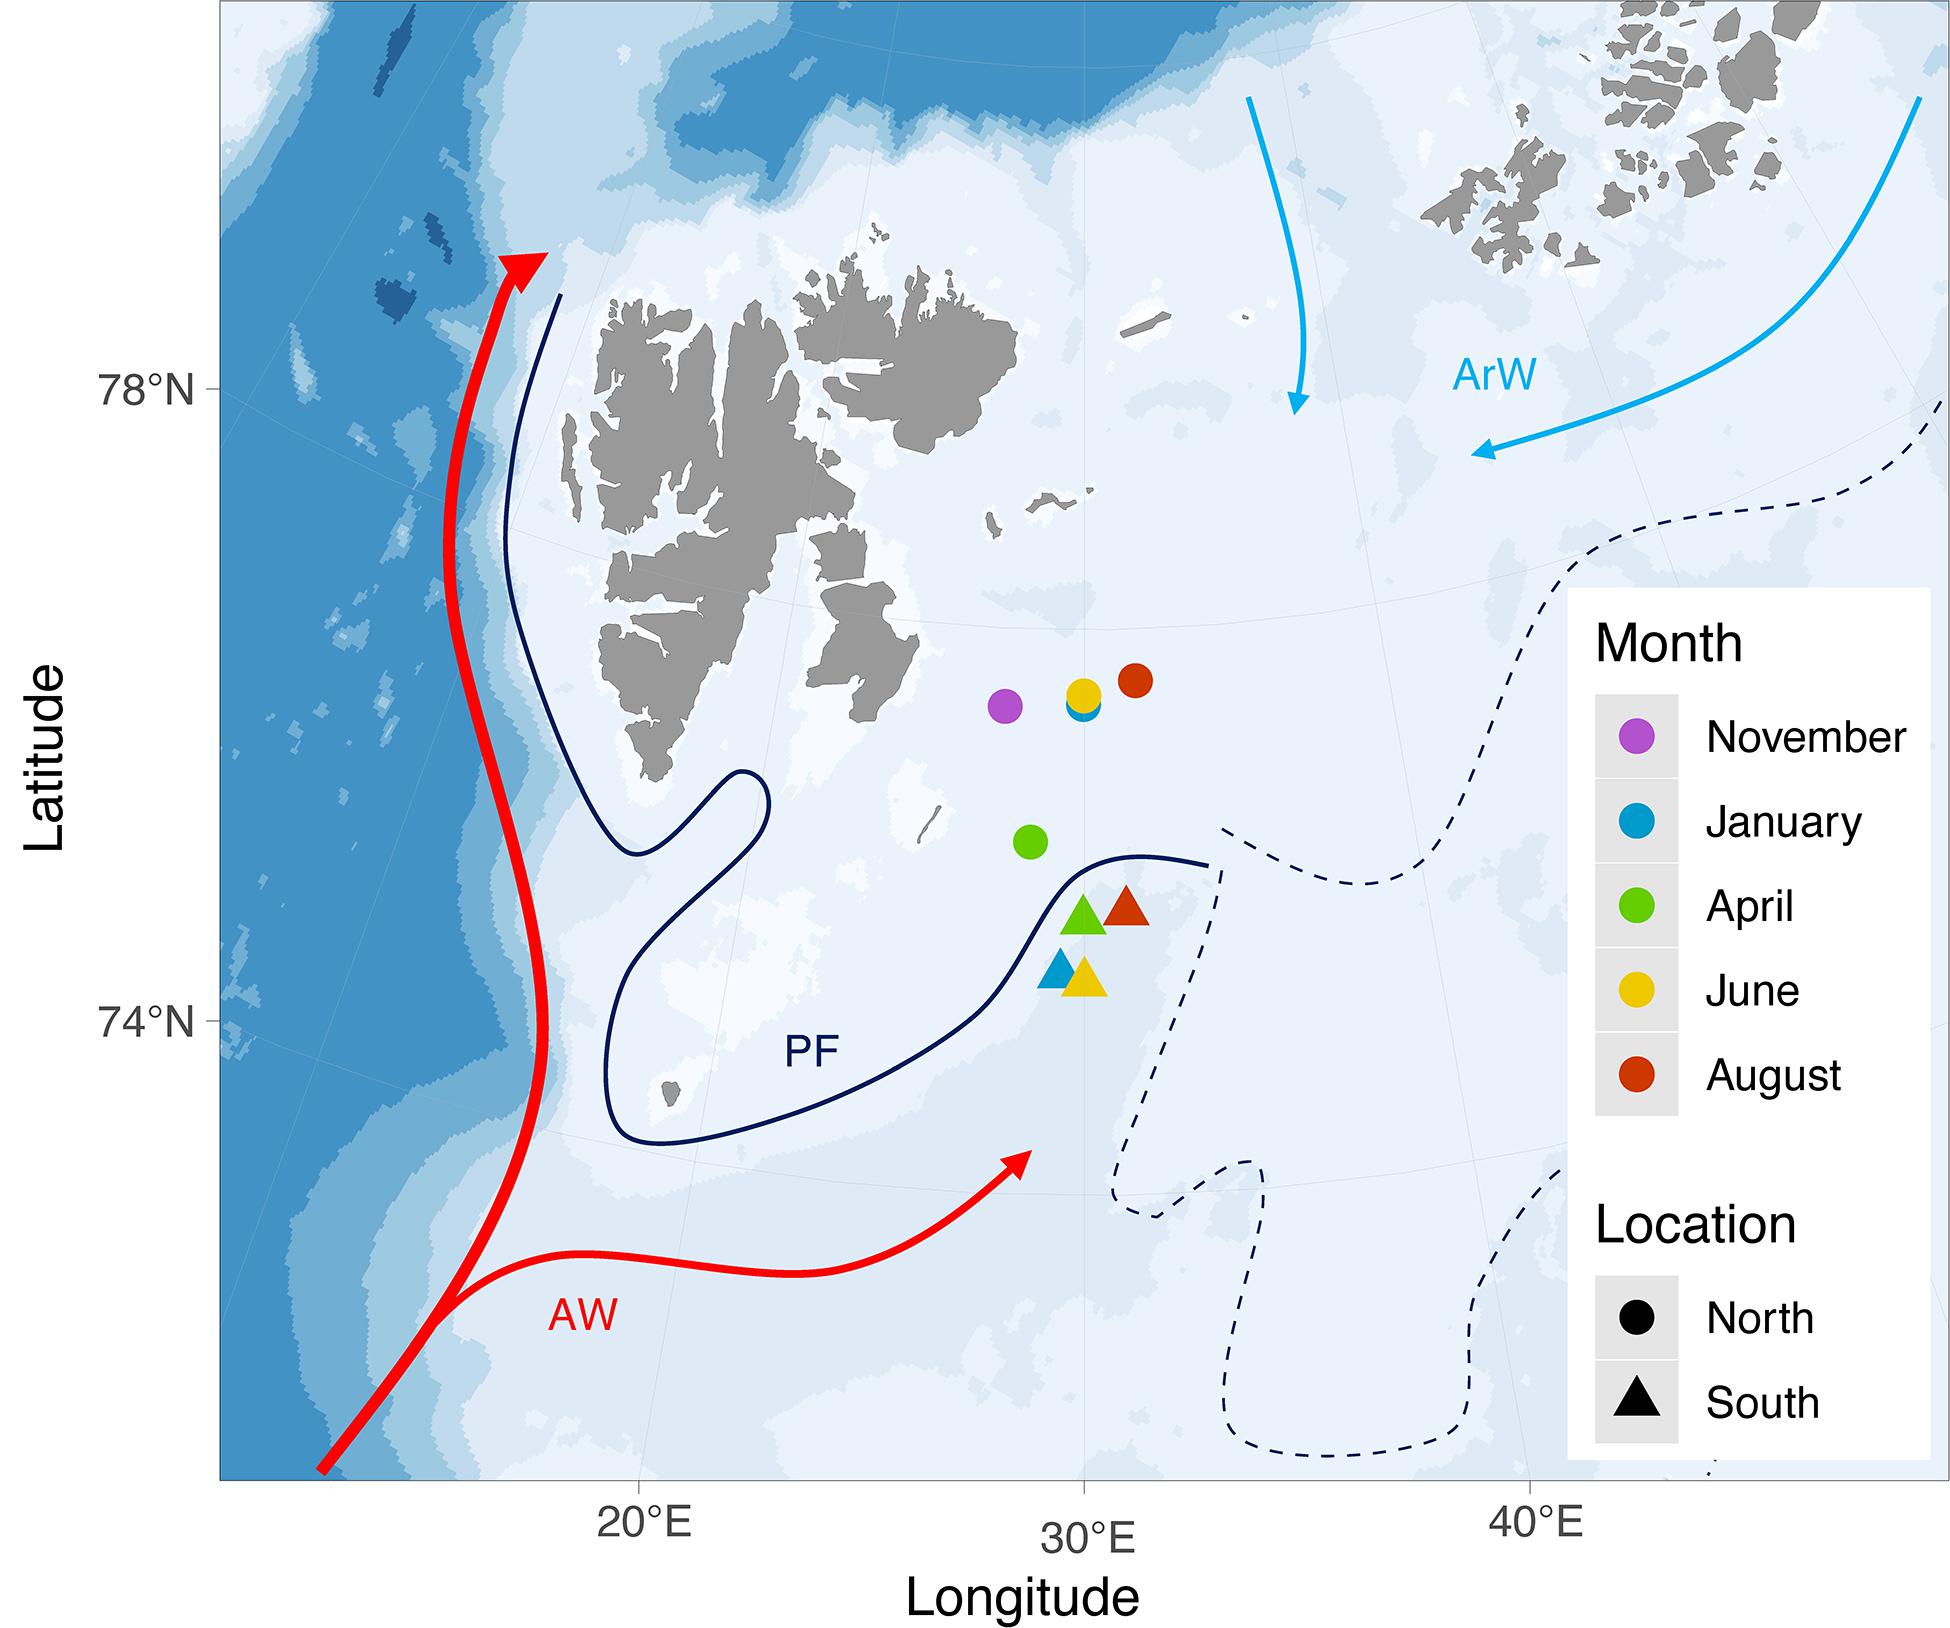 by Barcoding | Frontiers Across Barents and High-Throughput Meroplankton Revealed Polar Front Traits Sea Life-History Seasonality Diversity, DNA the